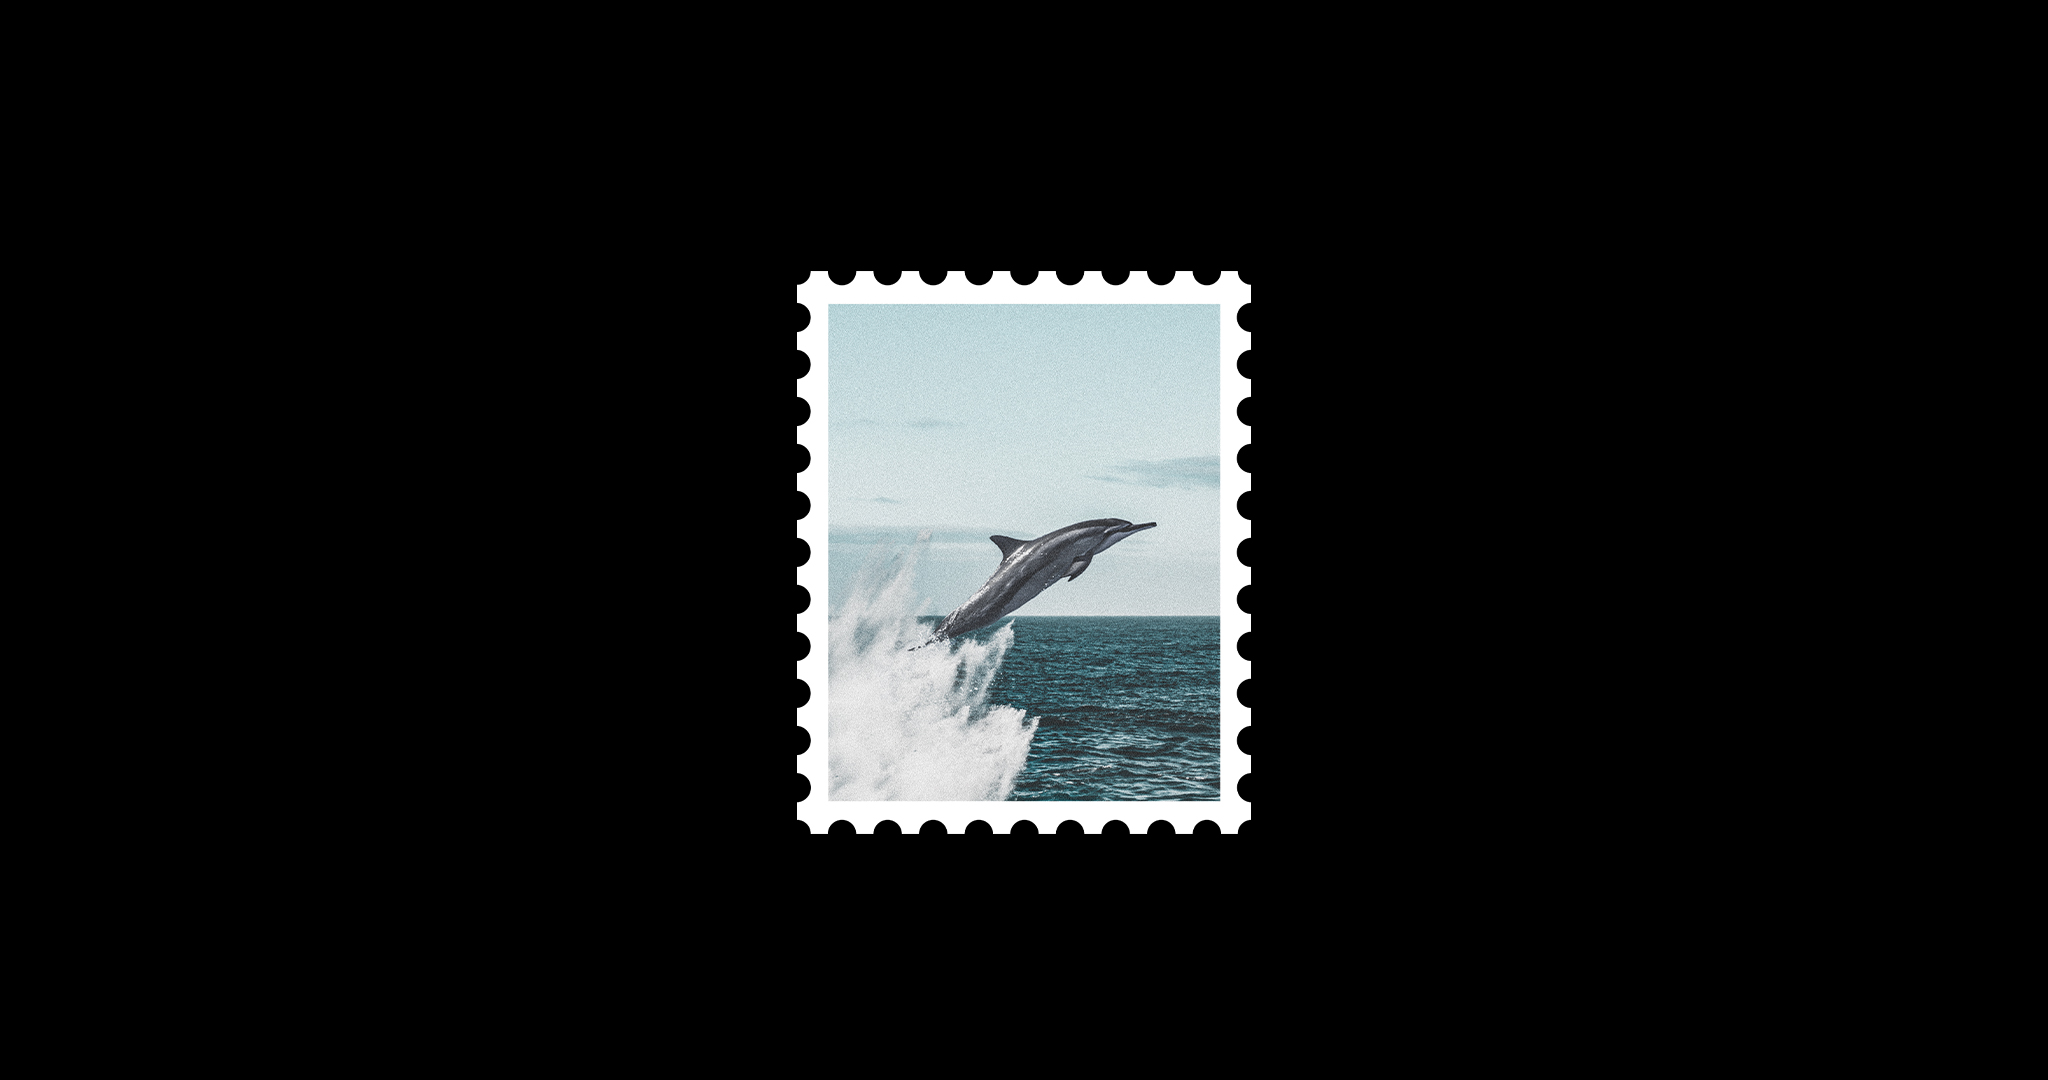 General 2048x1080 postcard noise graphic design photoshopped digital art black white stamps dolphin